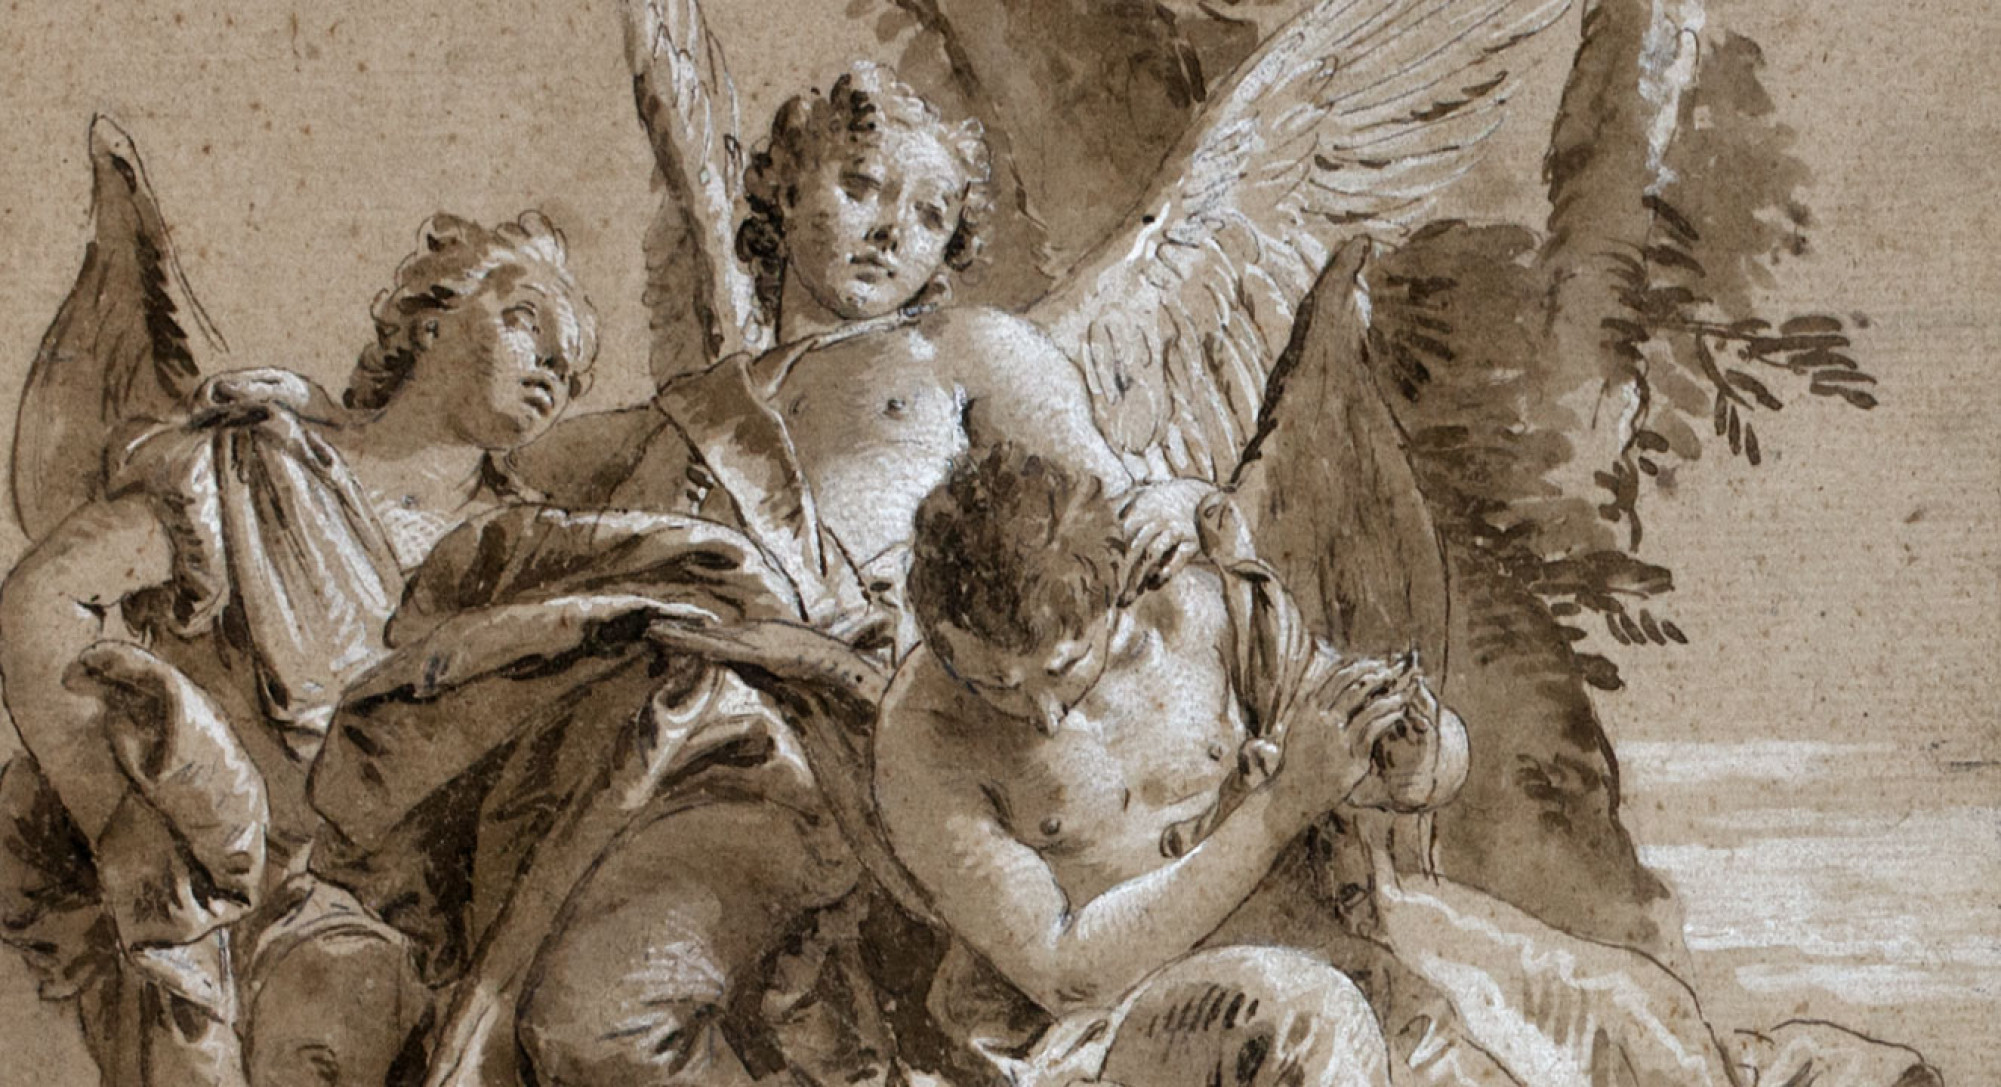 Dreams of light and ink: Venetian drawing from Tiepolo to Canova